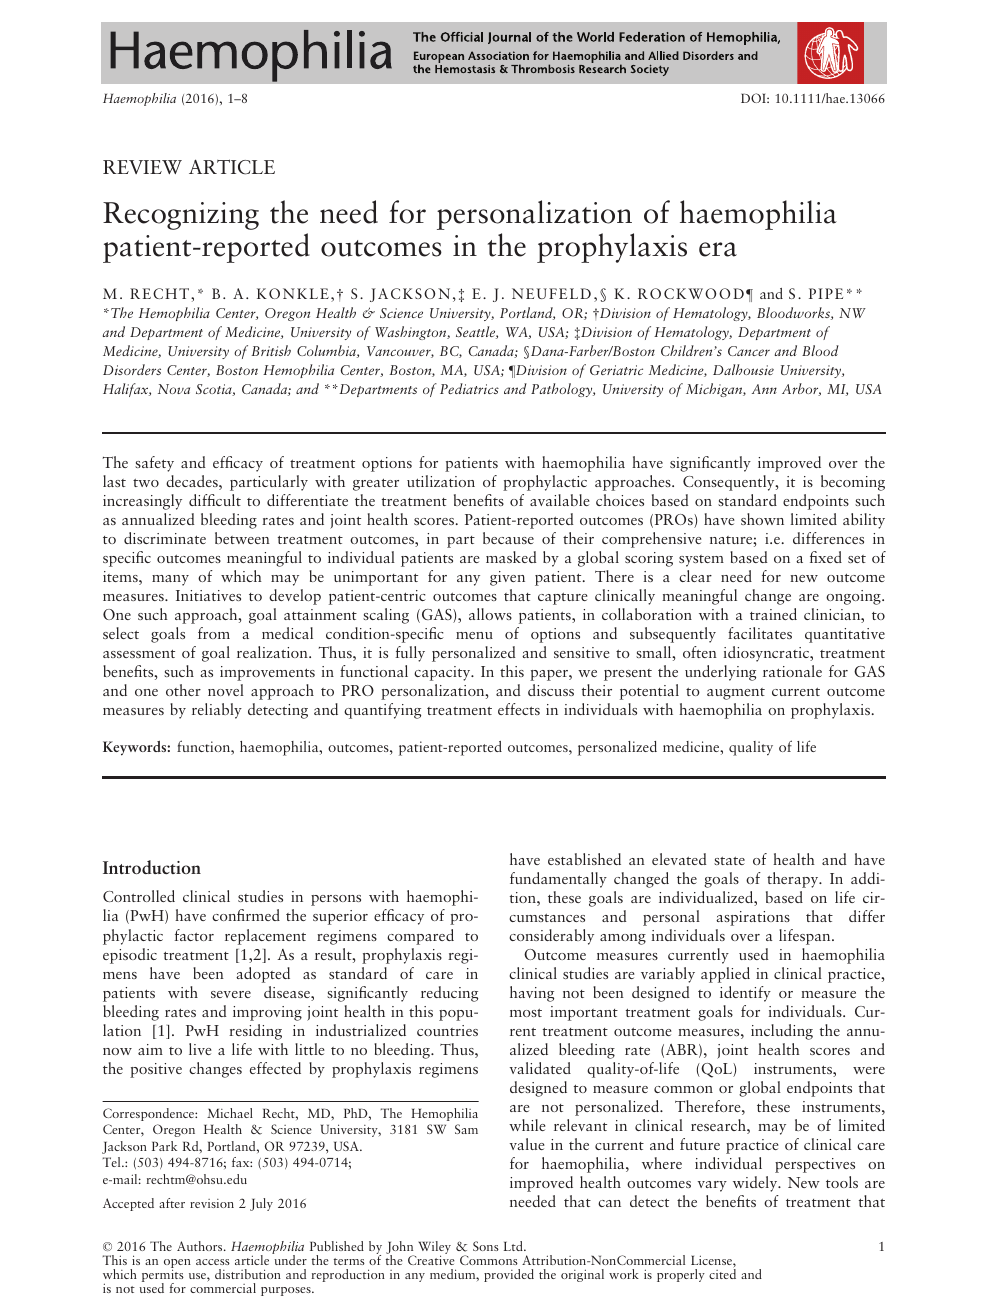 Recognizing The Need For Personalization Of Haemophilia Patient